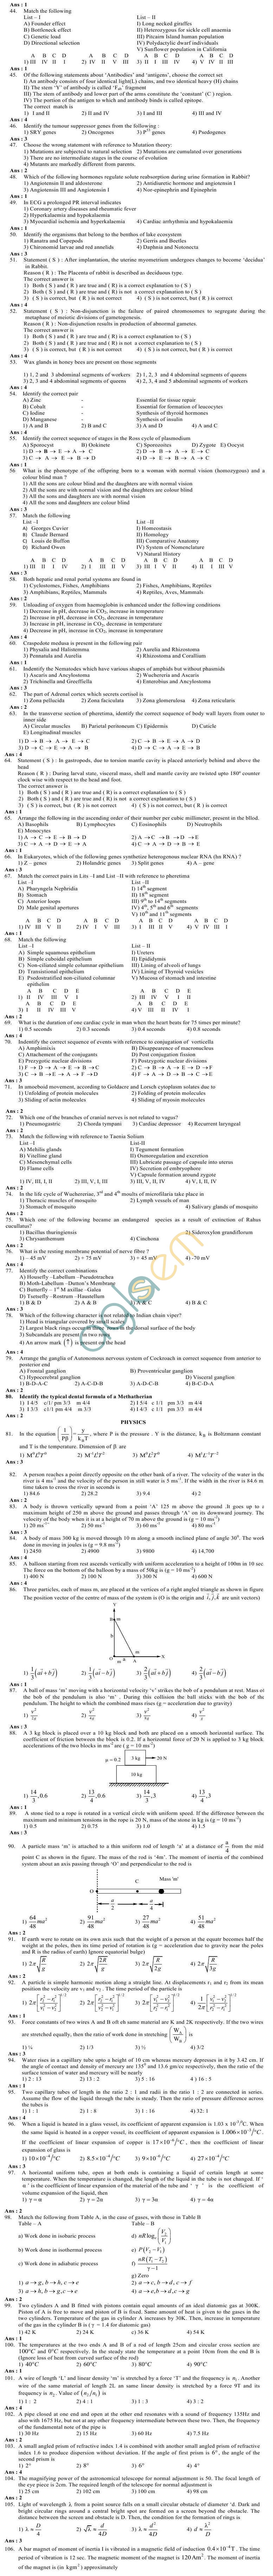 EAMCET 2013 Agriculture and Medical Question Paper with Solutions